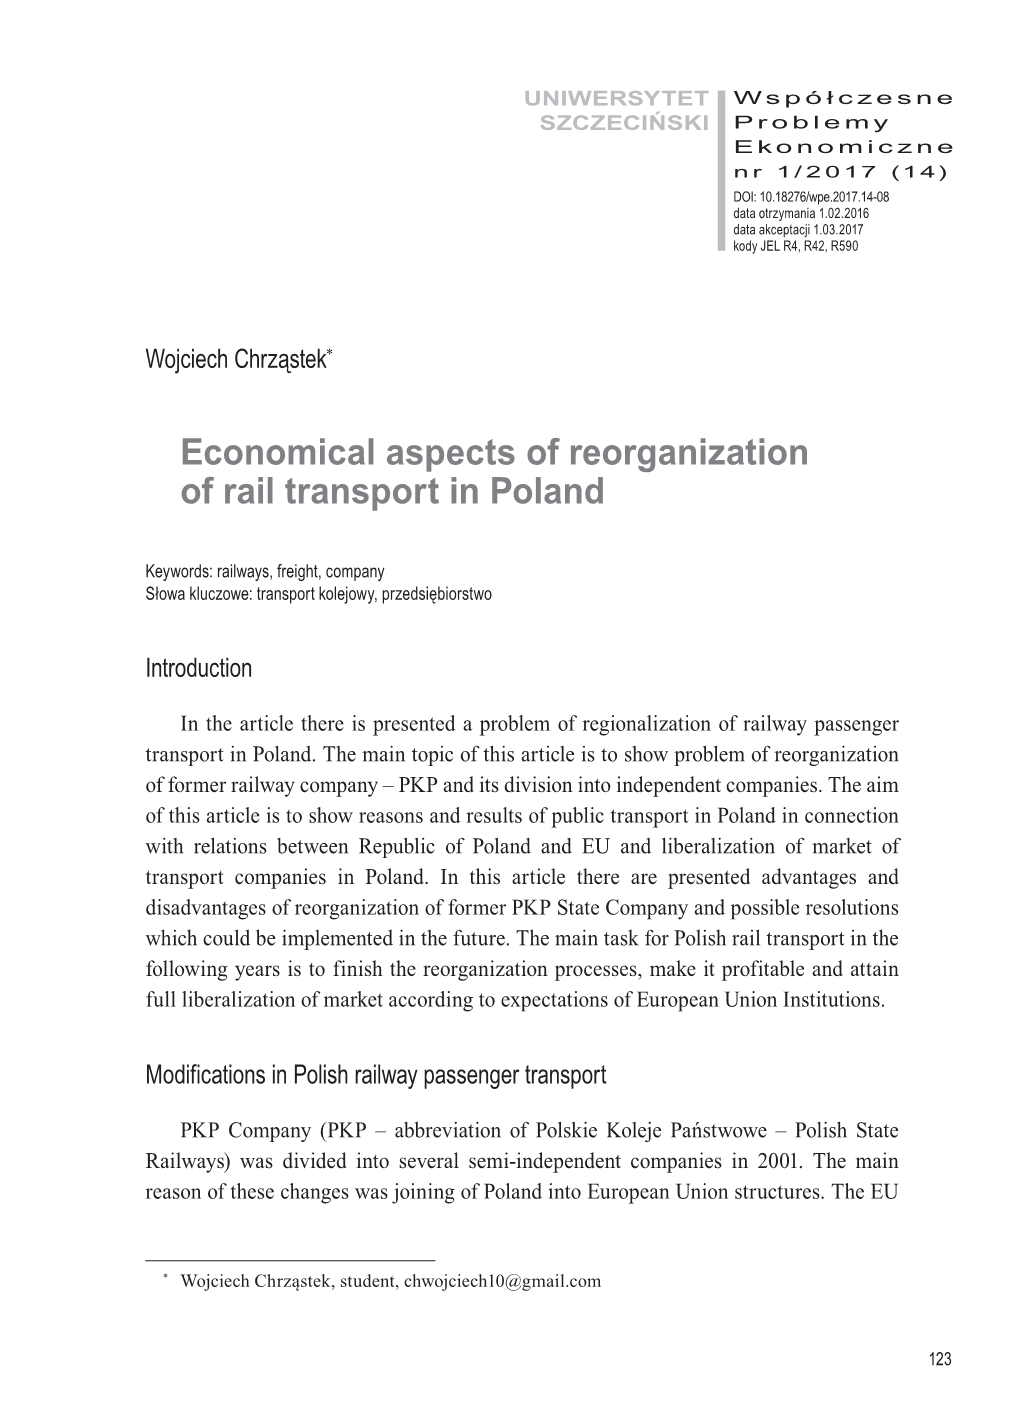 Economical Aspects of Reorganization of Rail Transport in Poland